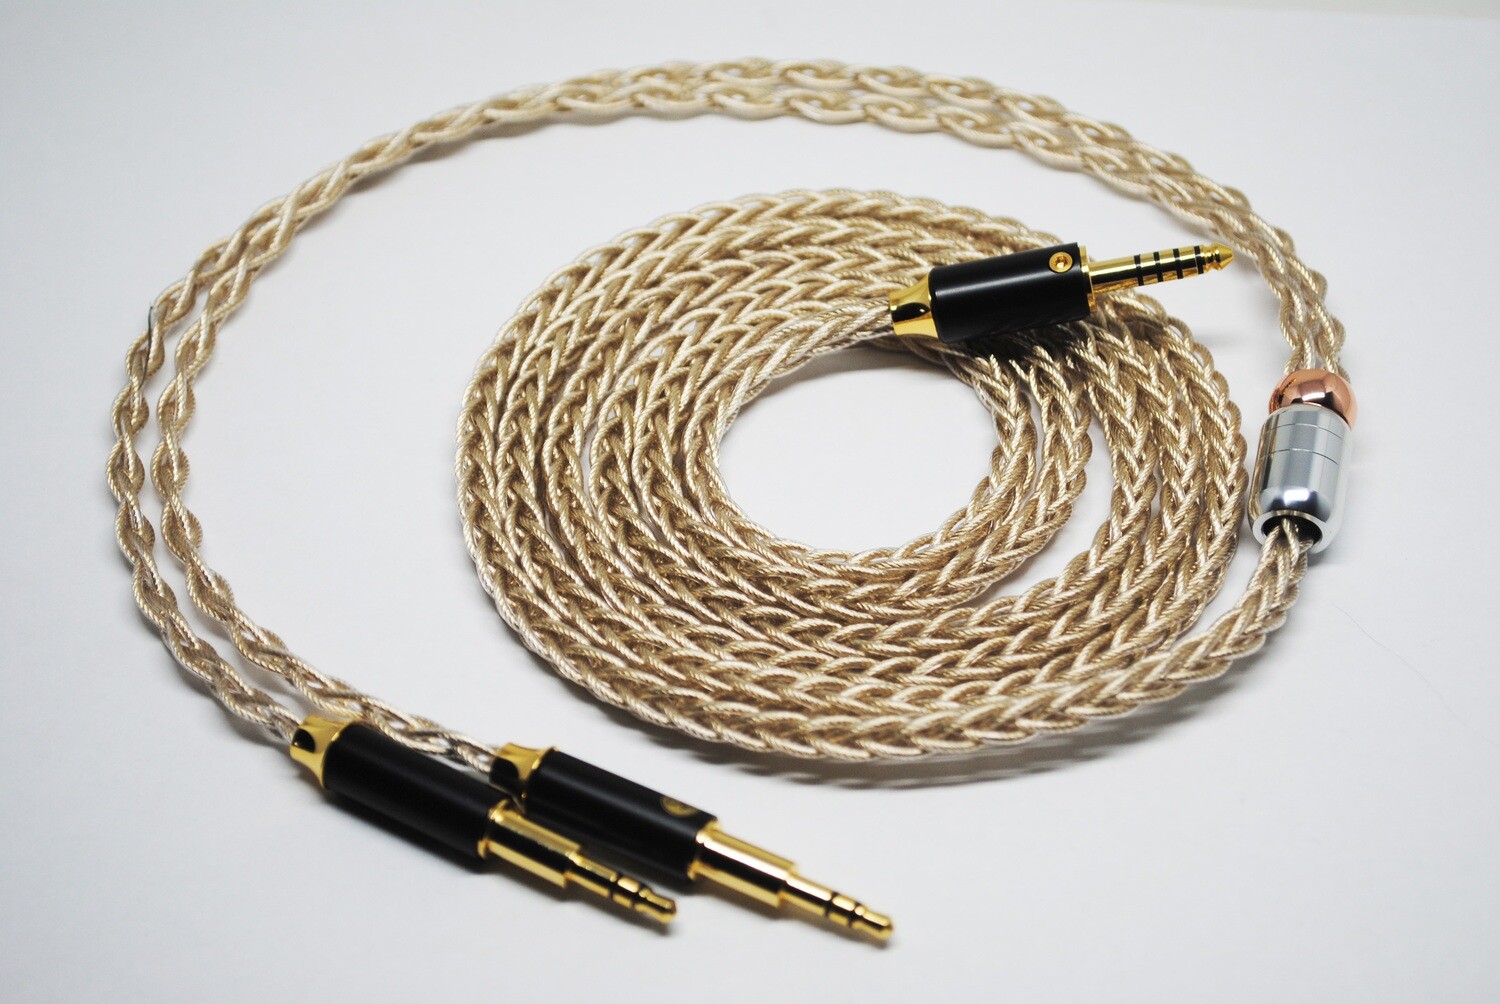 X8 Series Custom Cable for Headphones